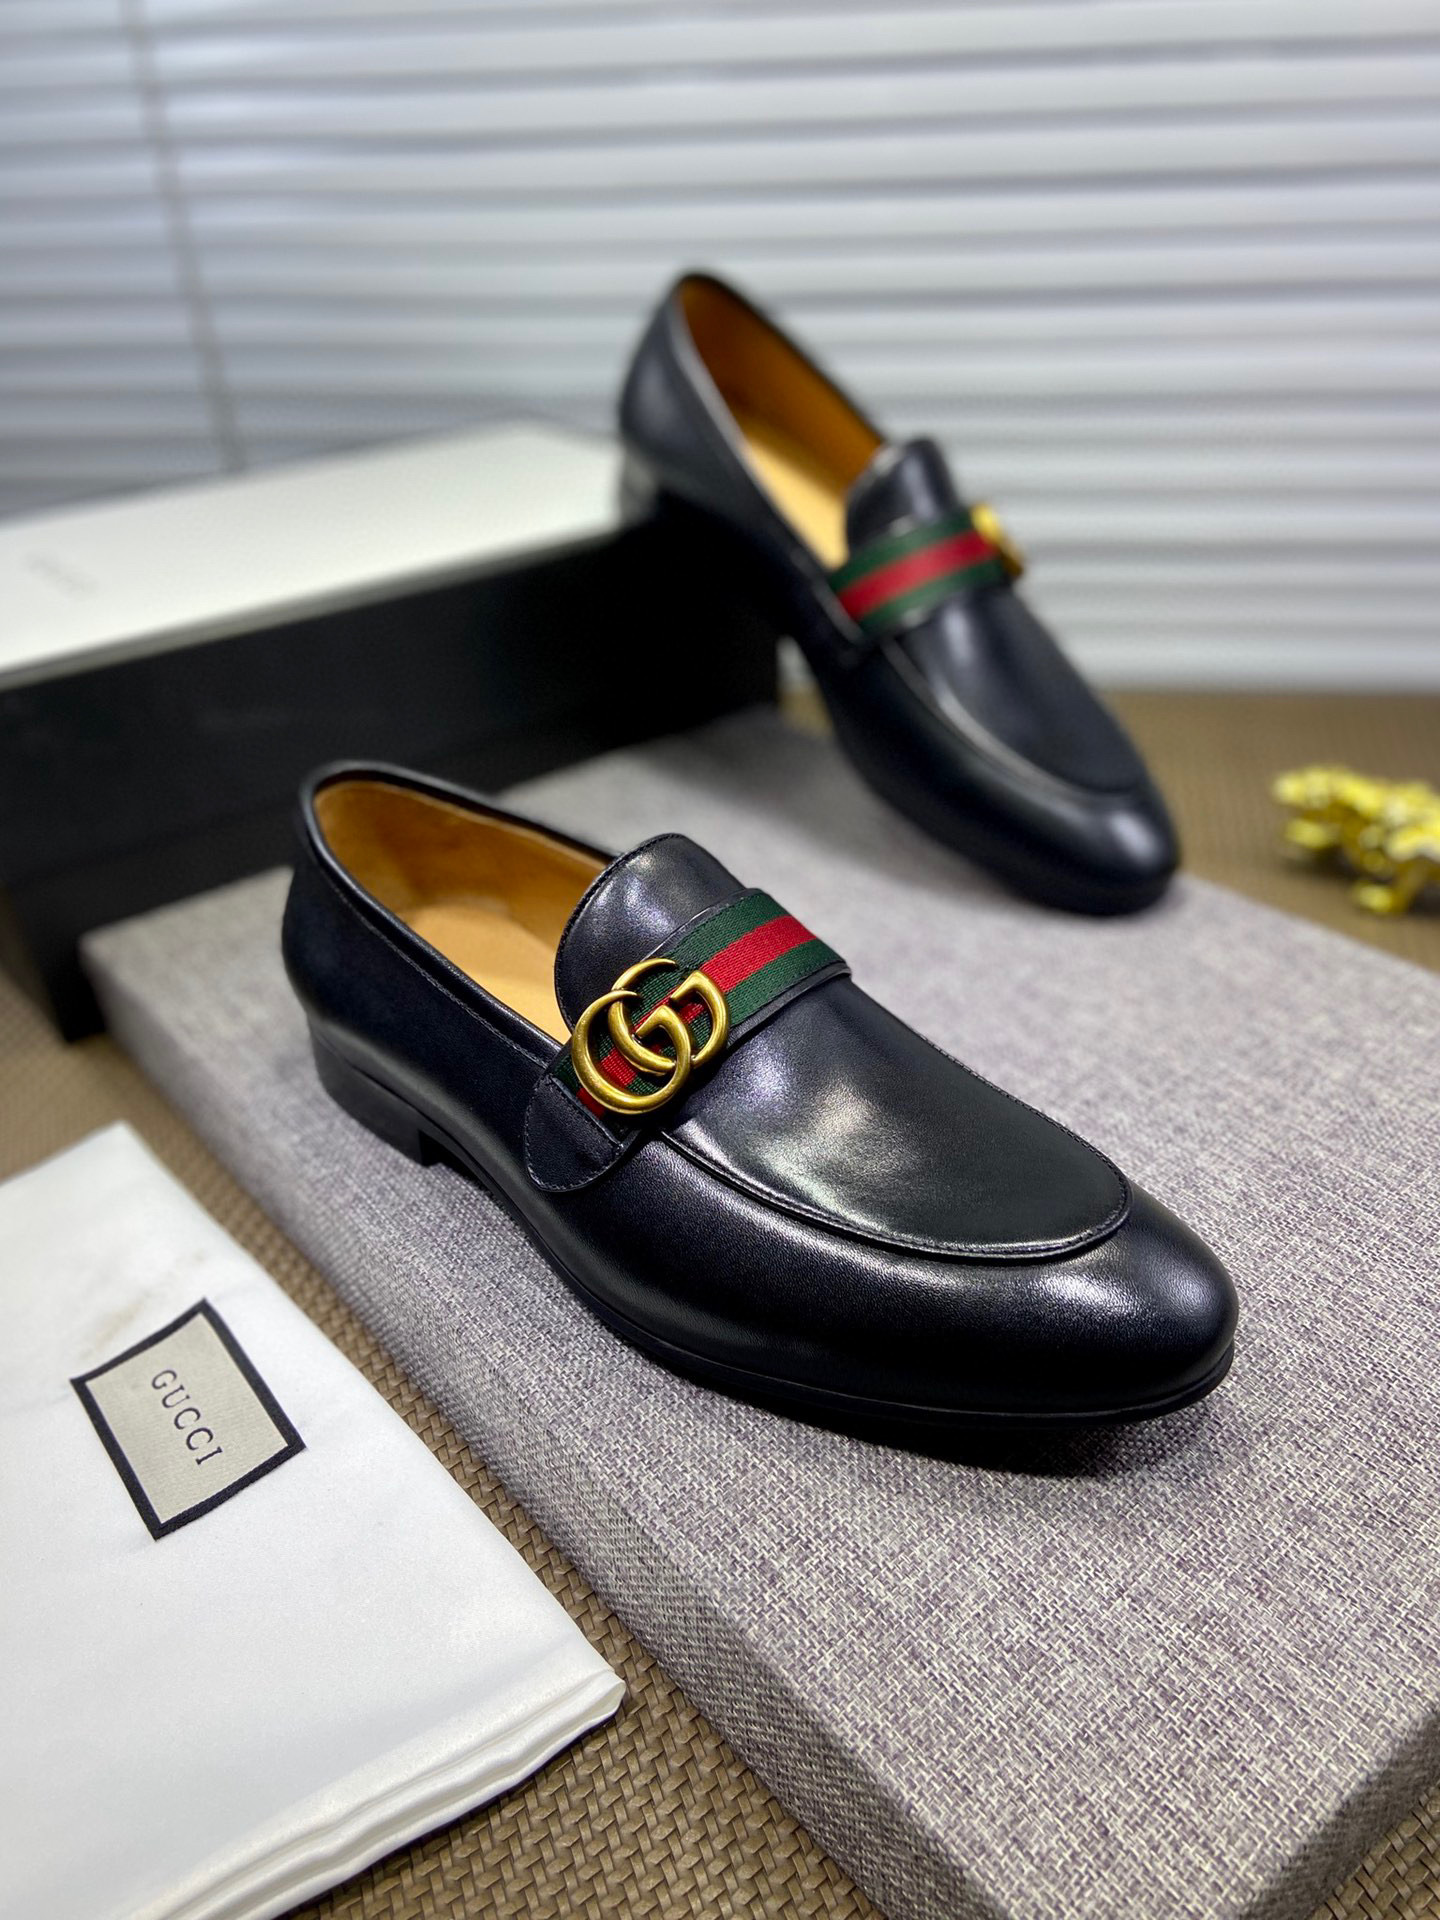 Gucci Cowhide Leather Loafer For Men # 274364, cheap Gucci Dress Shoes For Men, only $92!